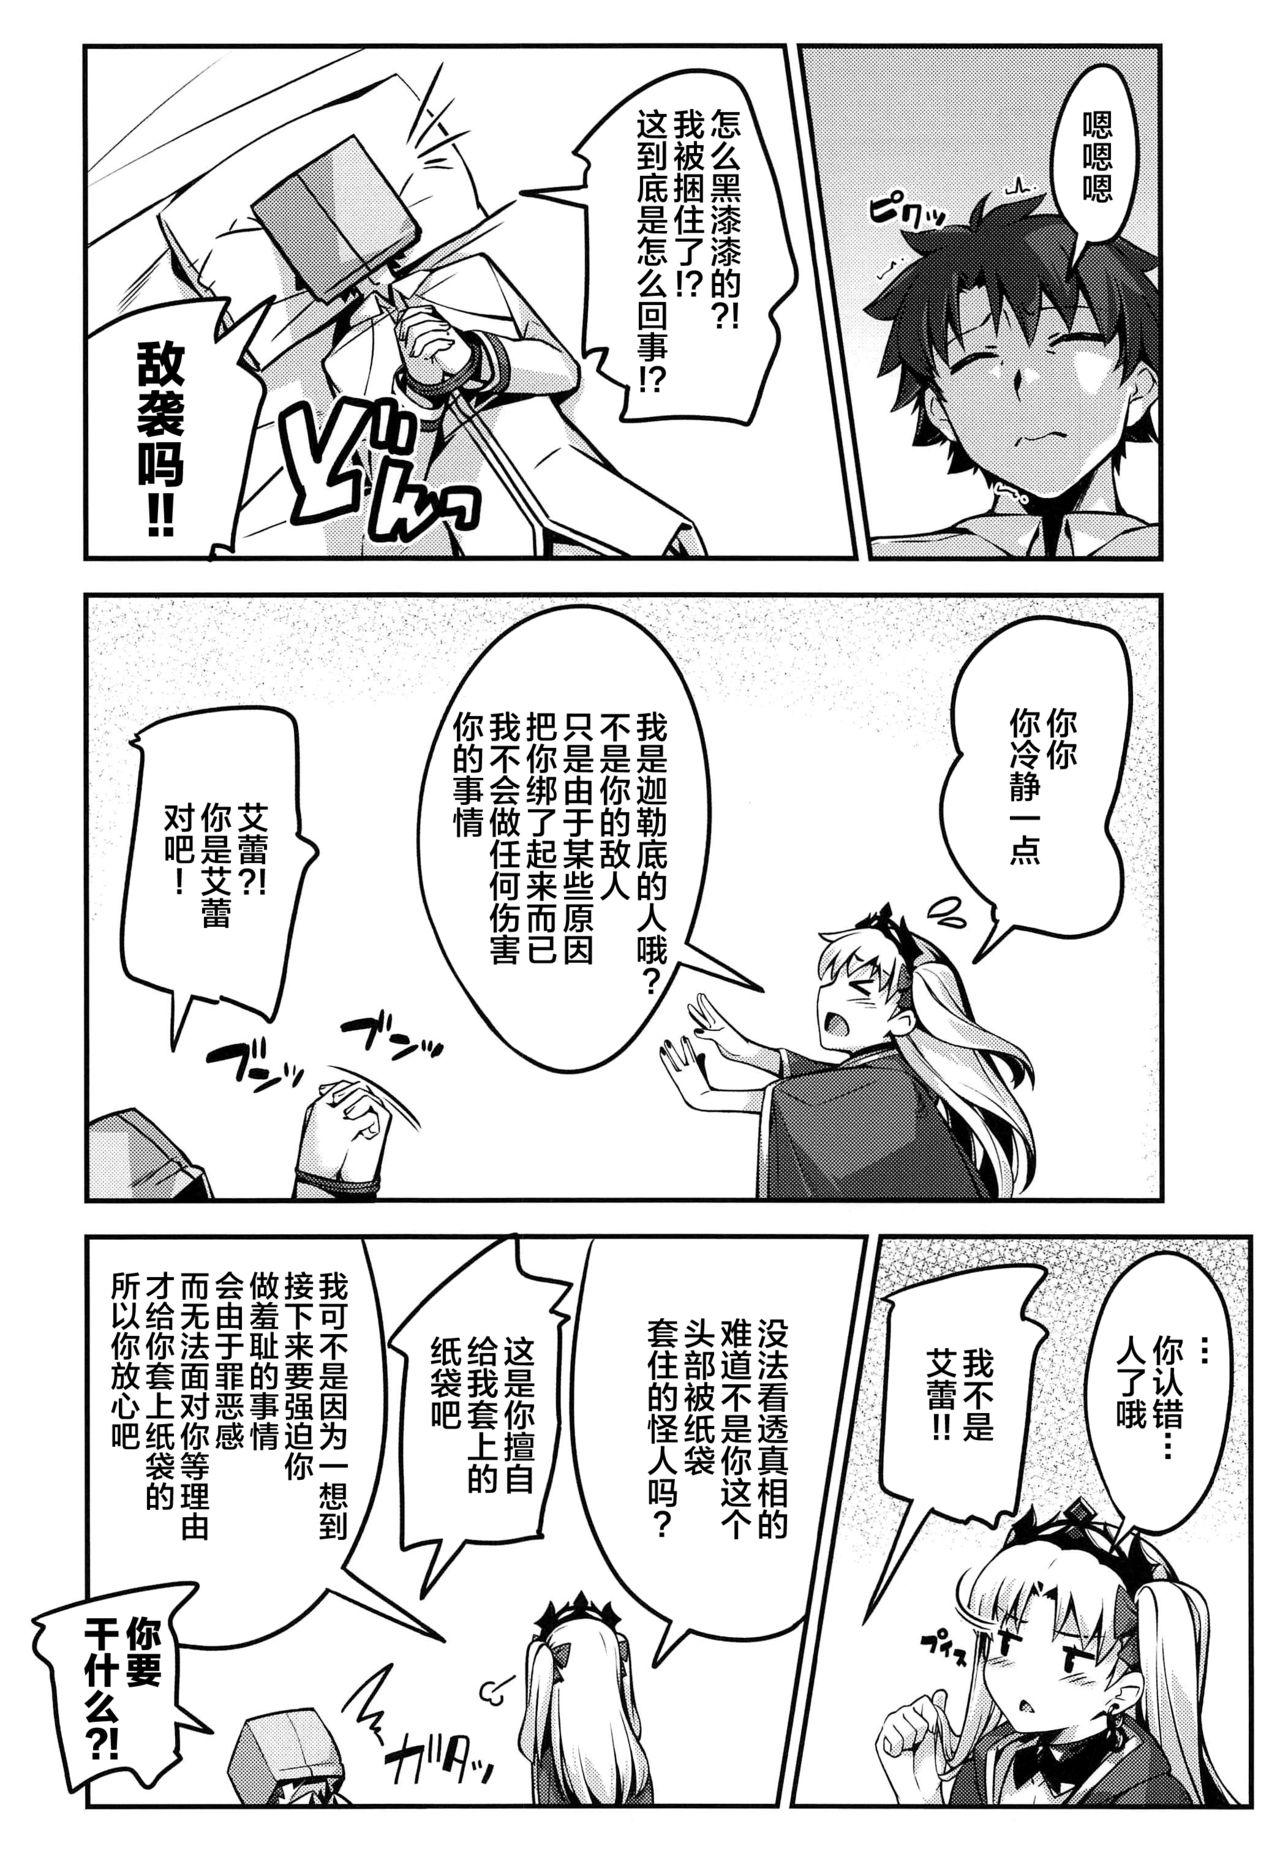 Doggystyle Hiroigui. - Fate grand order Fat - Page 7